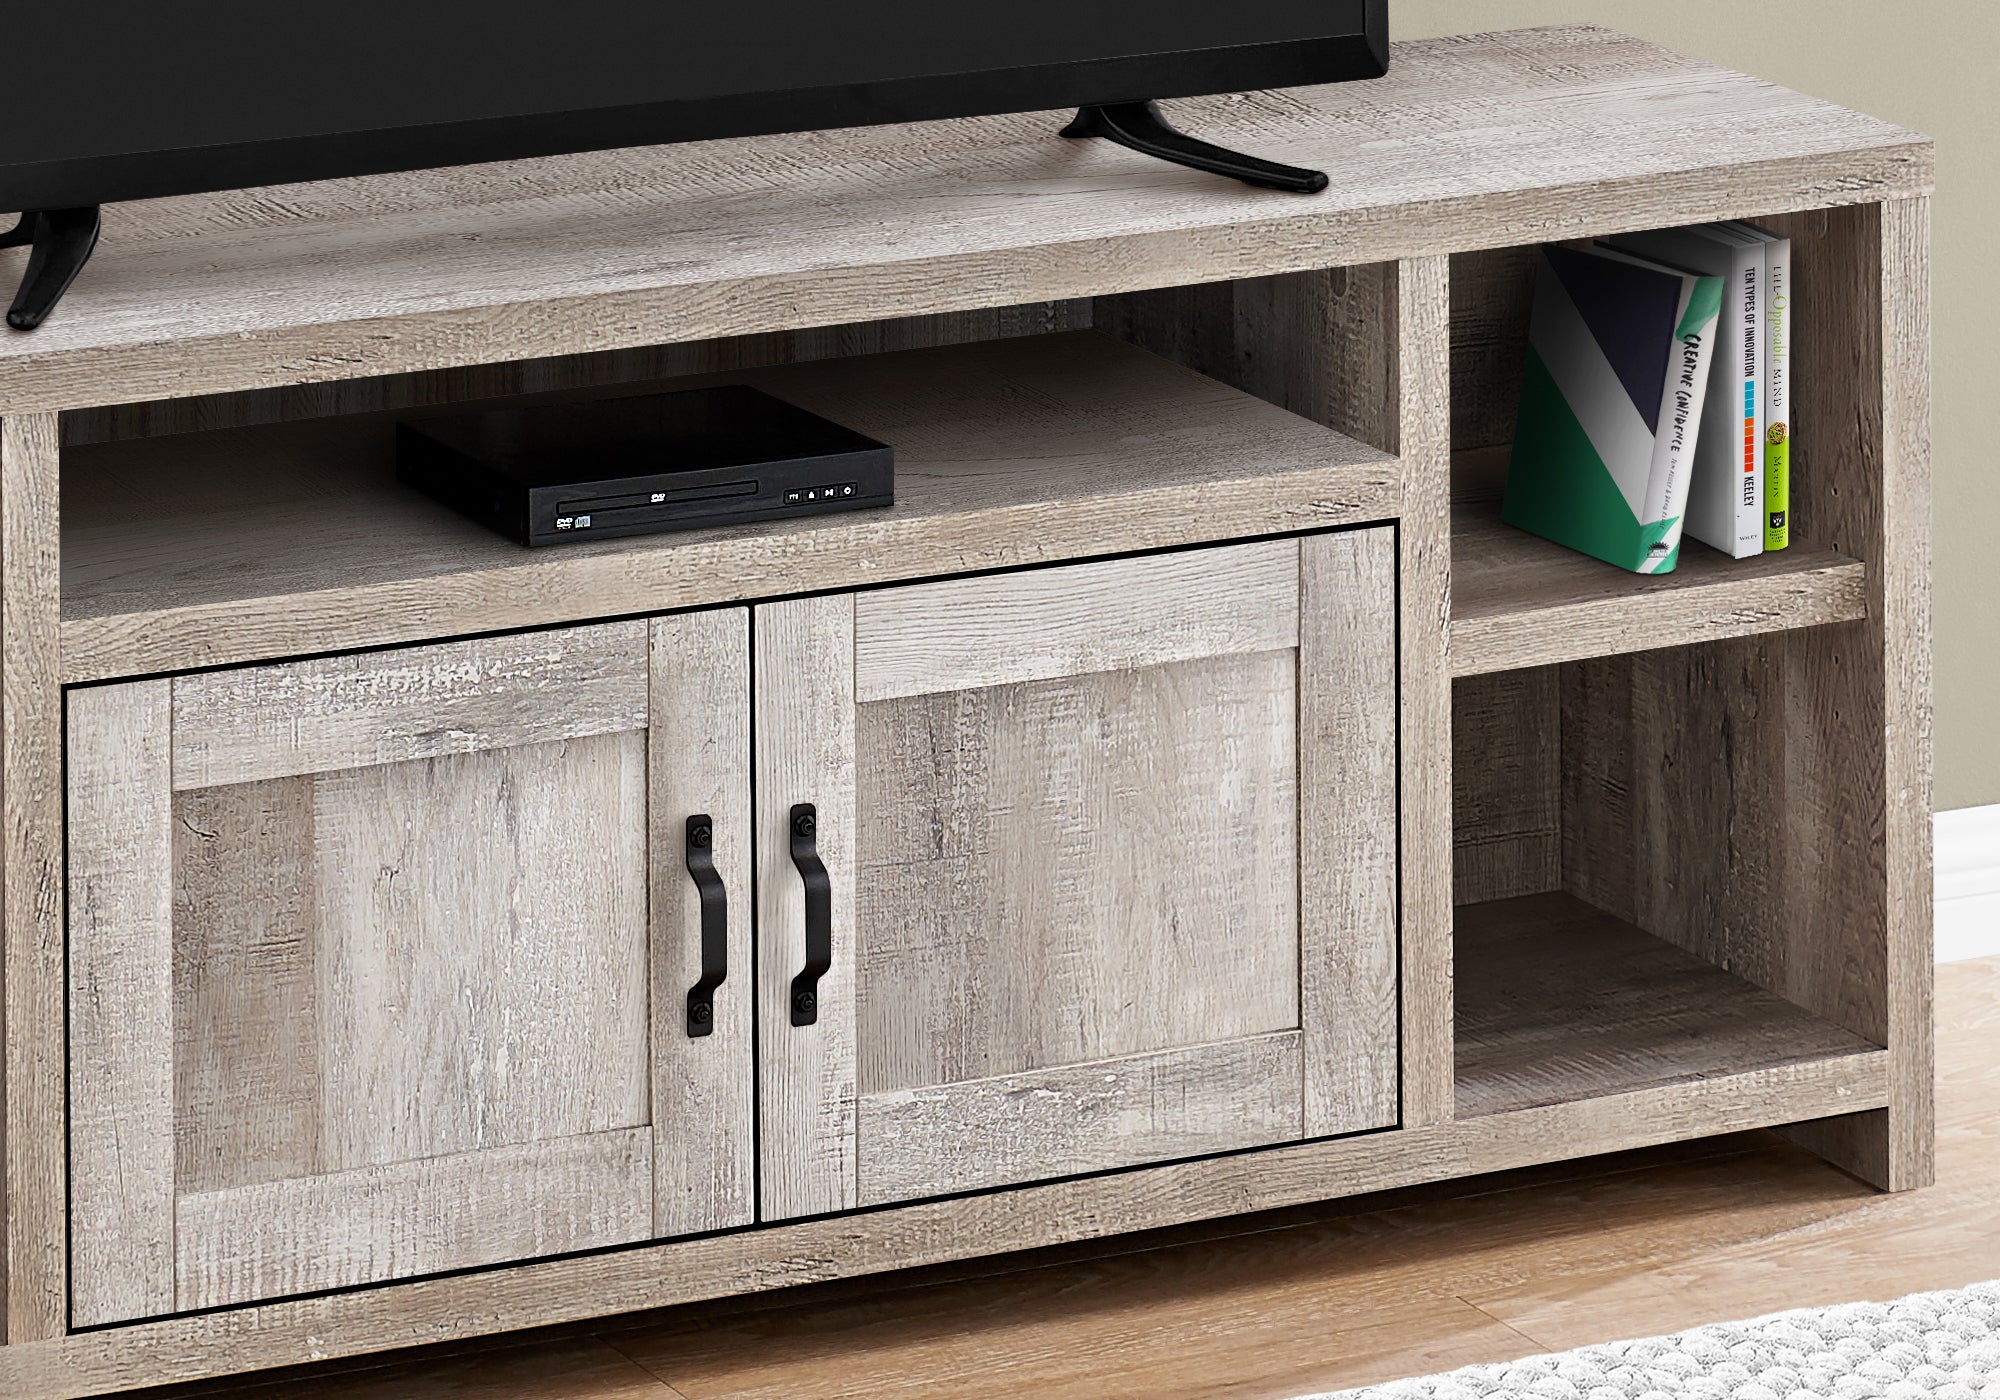 I 2742 - TV STAND - 60"L / TAUPE RECLAIMED WOOD-LOOK BY MONARCH SPECIALTIES INC